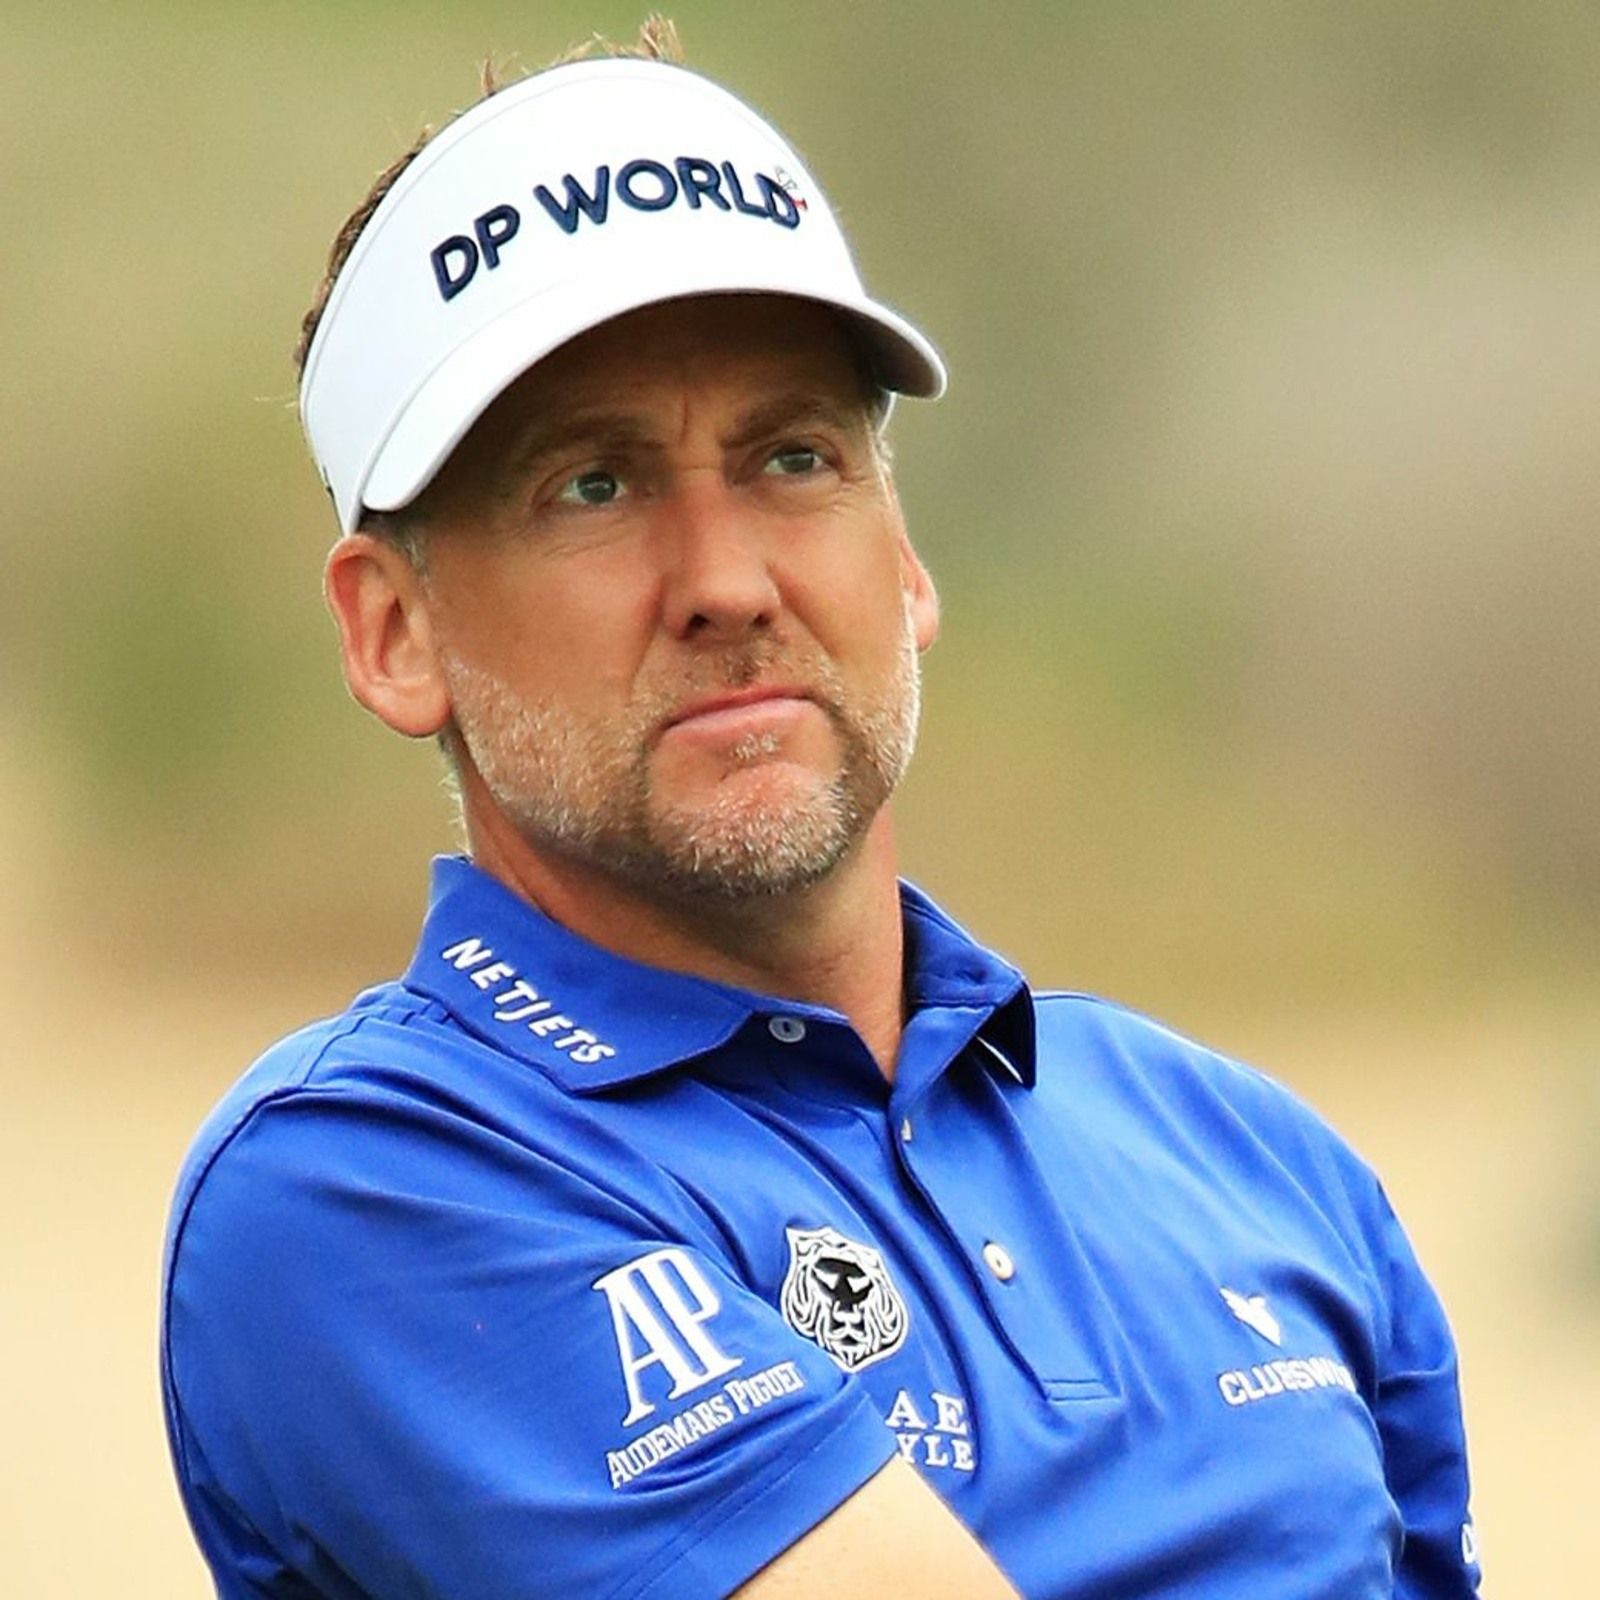 Ian Poulter: ”It Would Be A Huge Honour To Represent Europe Again”